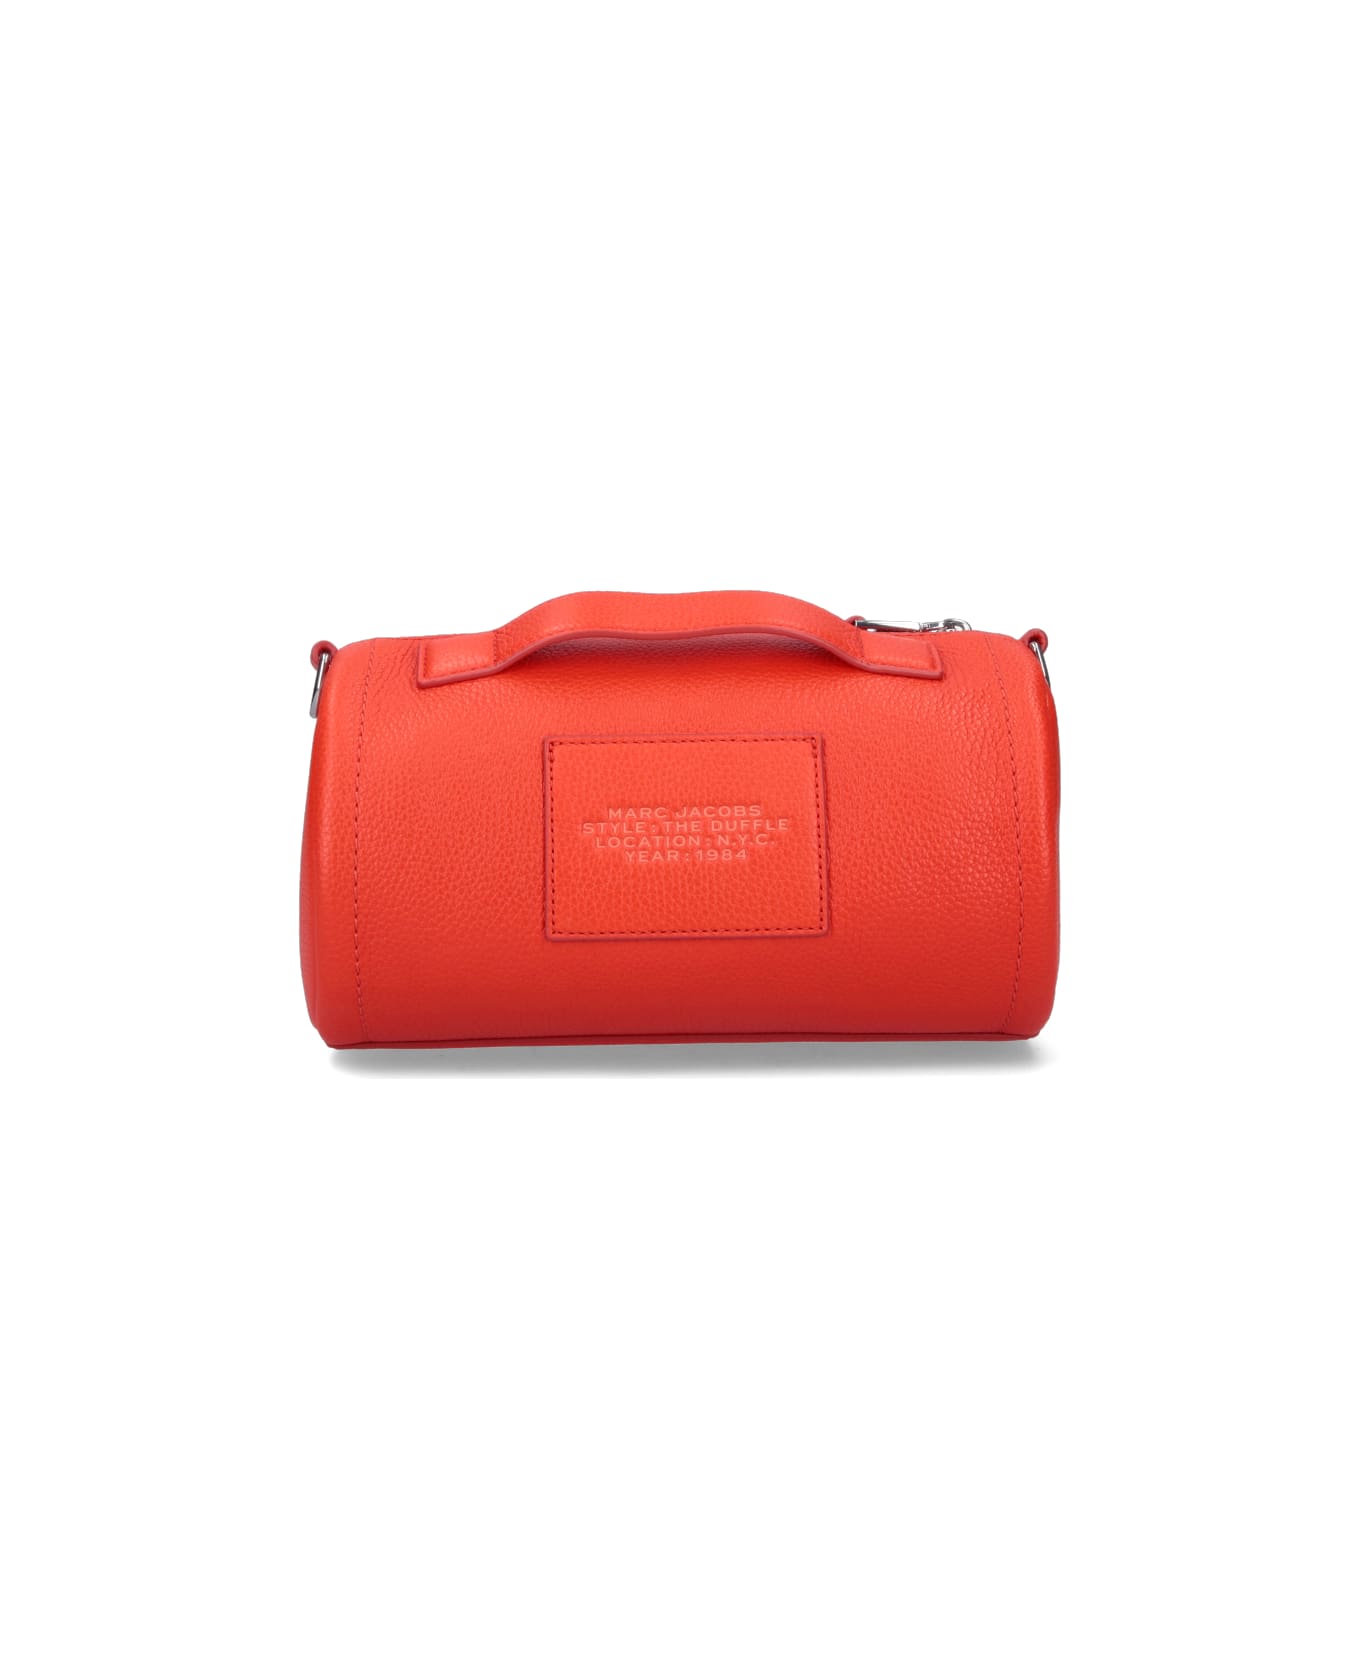 Marc Jacobs The Leather Duffle Bag - Orange